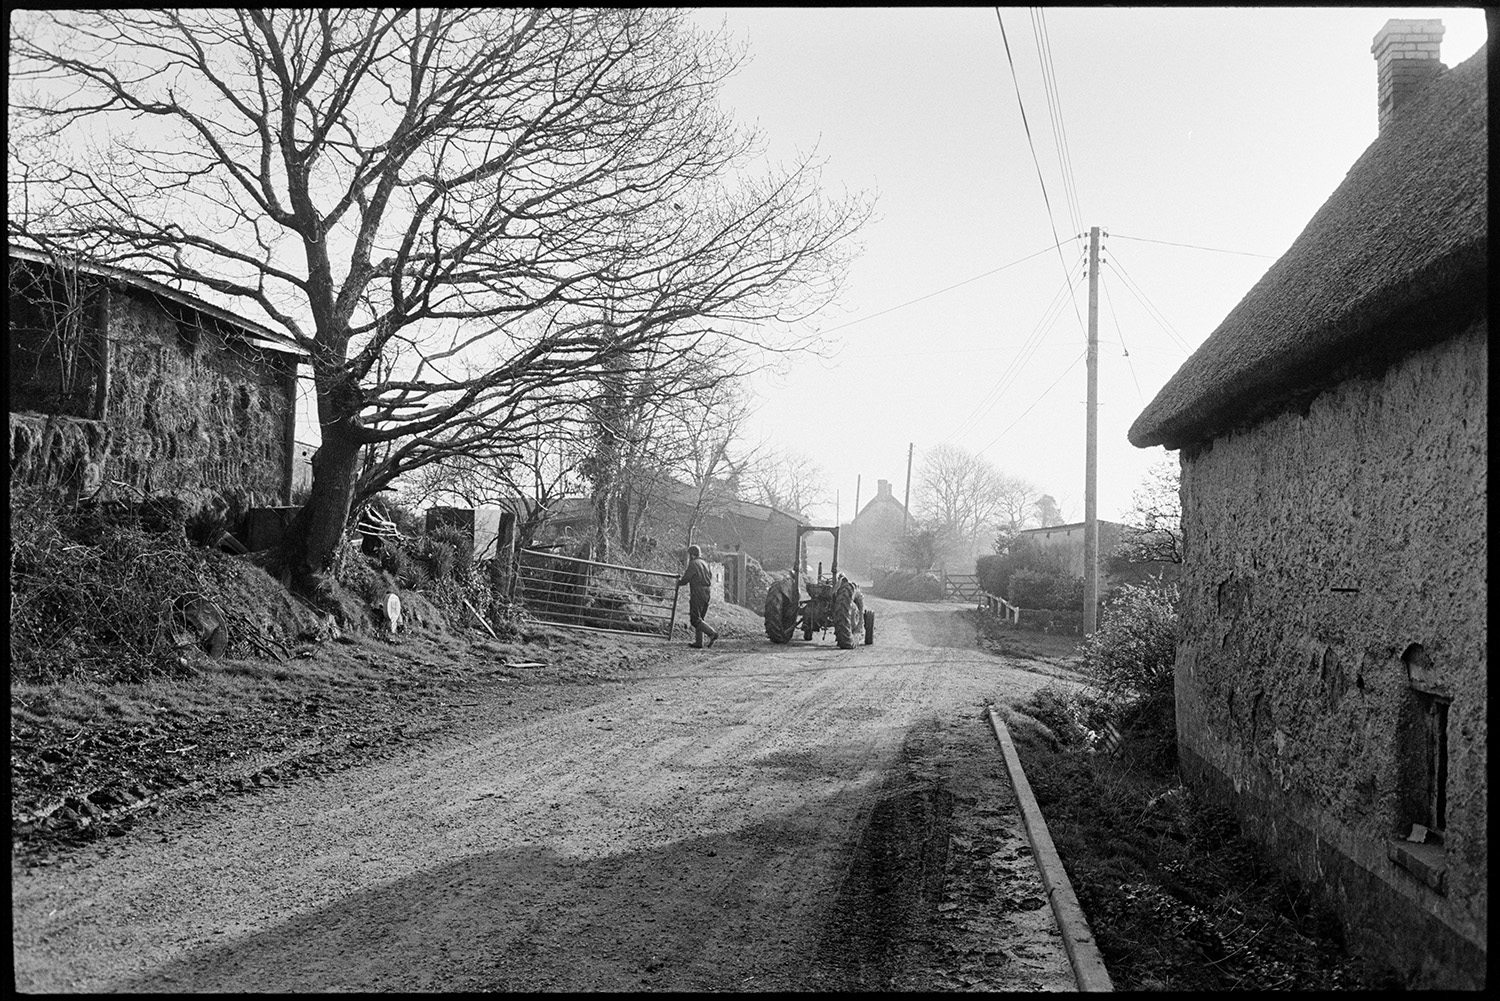 School bus arriving in village children waiting, morning. 
[A man closing a metal gate near a barn with hay bales and a road at Upcott, Dolton. A tractor is parked in the road and a thatched cob cottage can be seen in the foreground.]